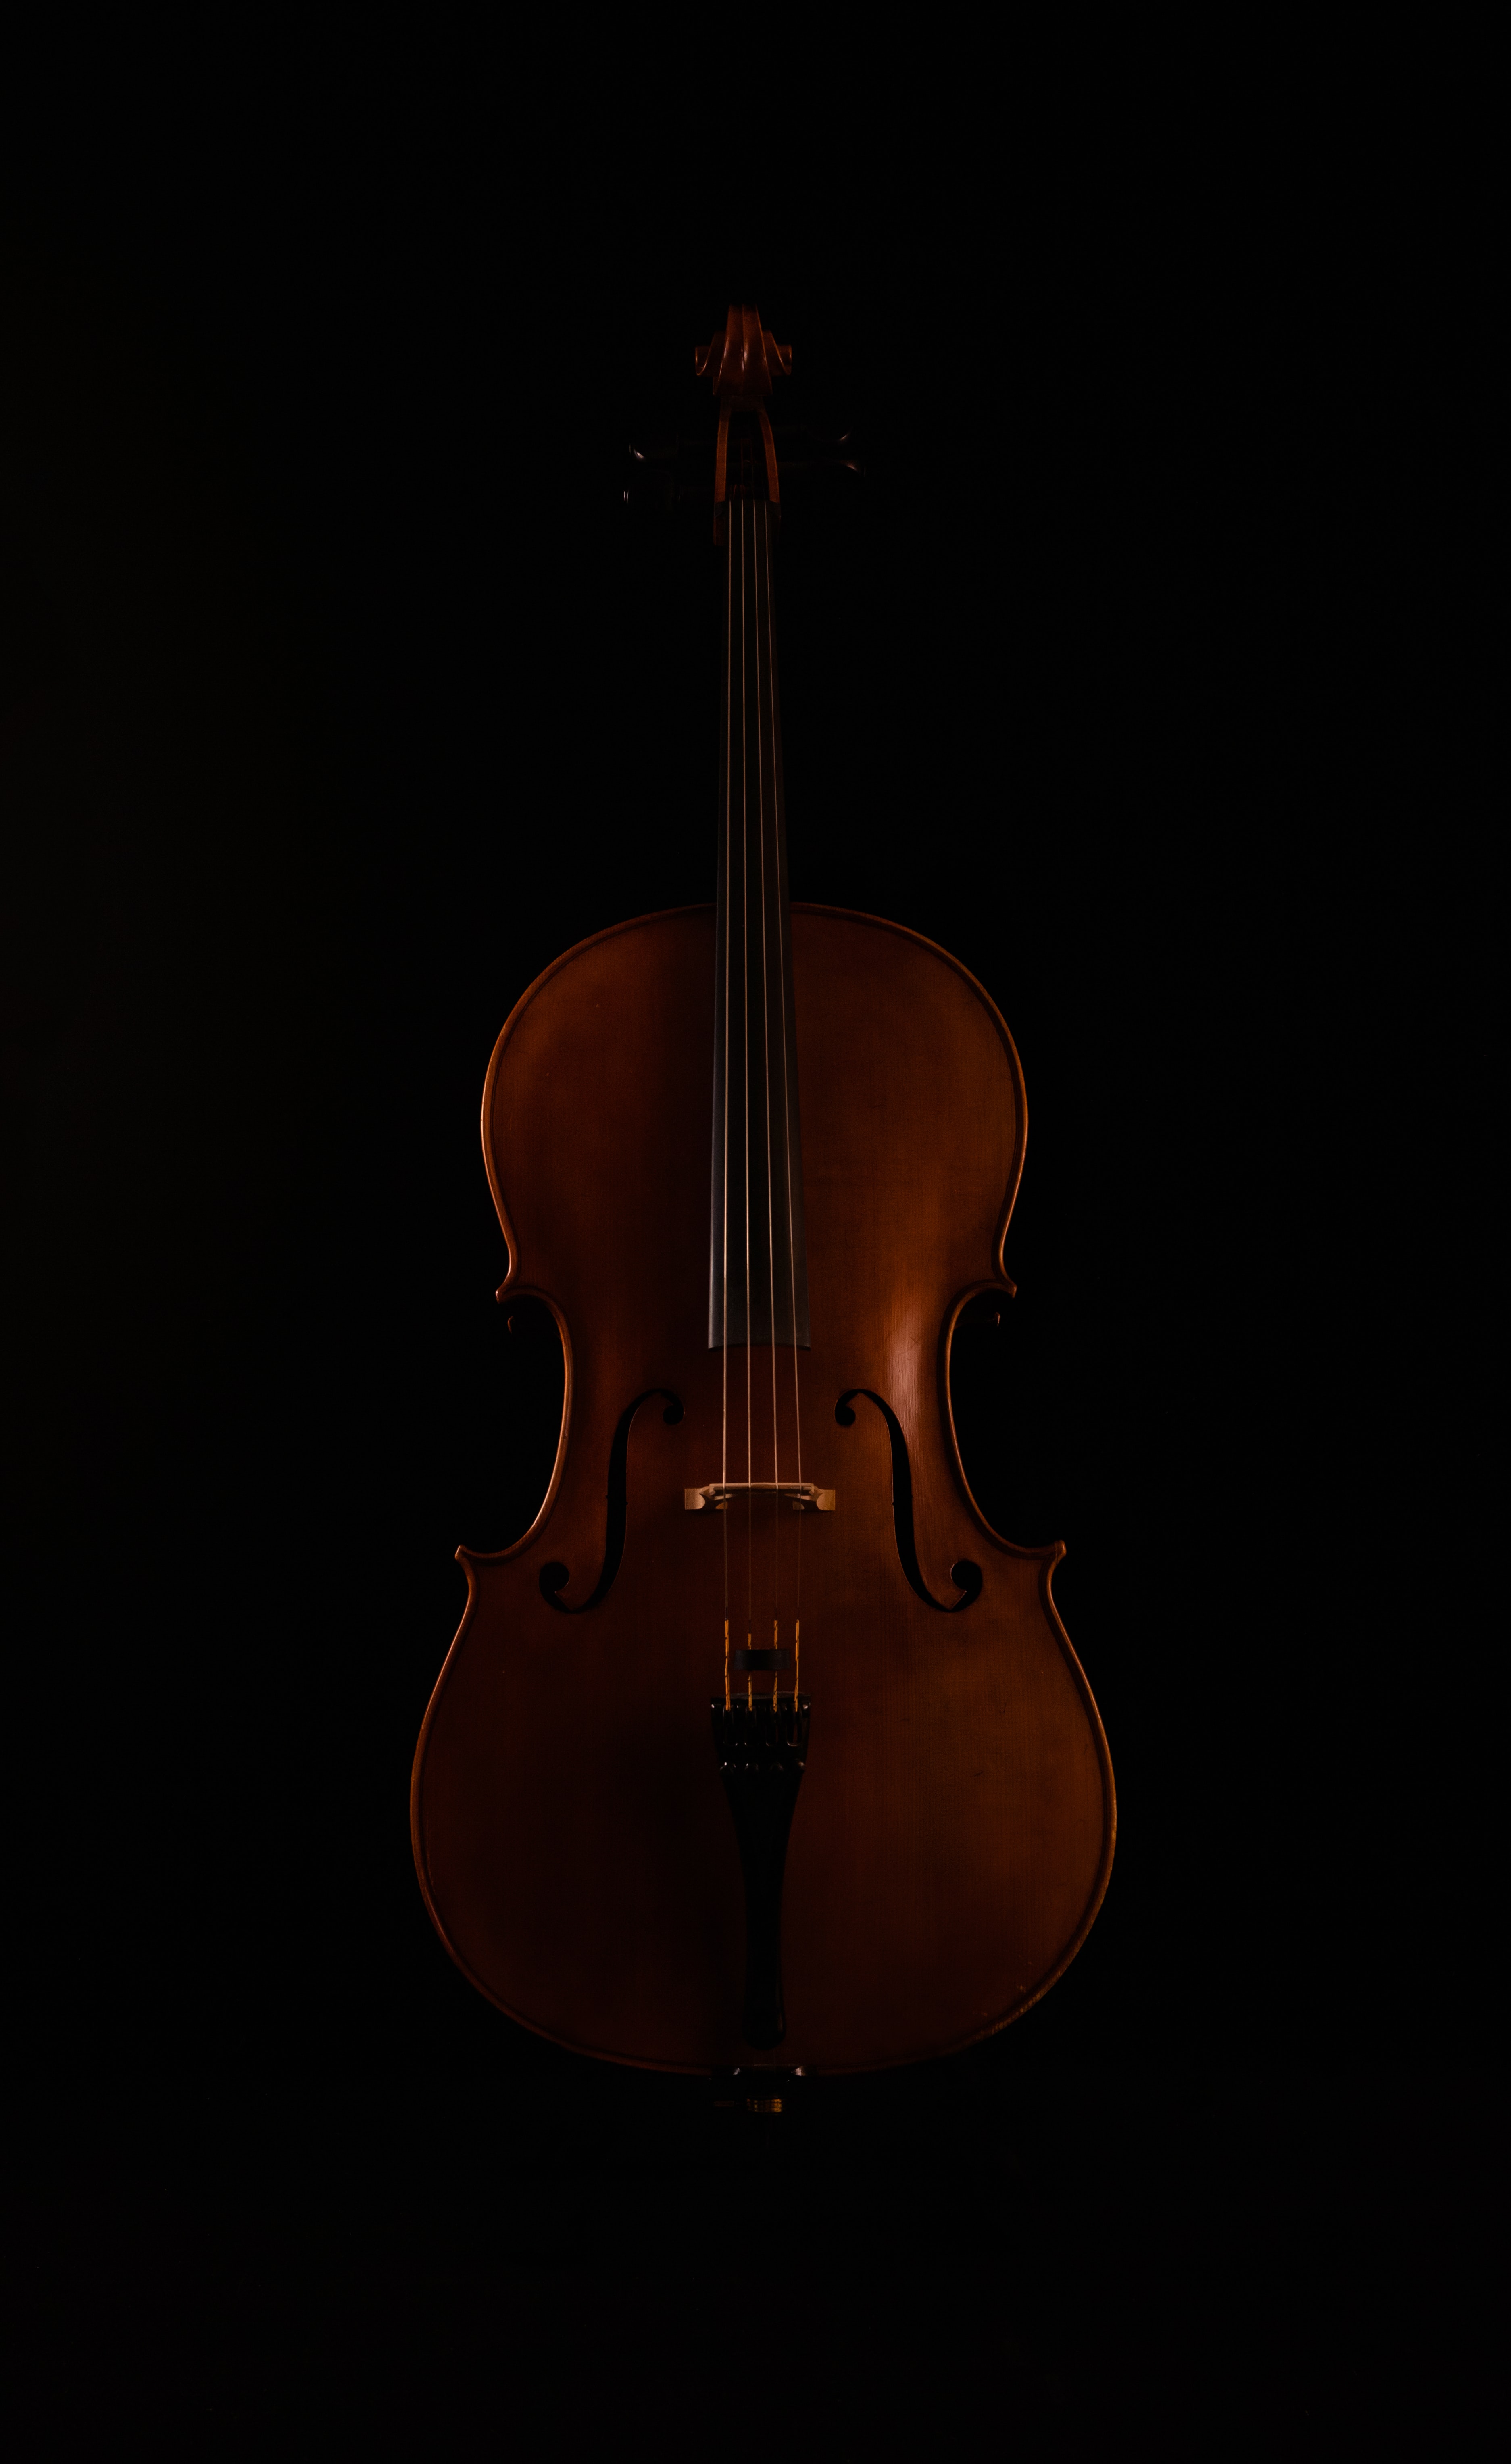 136117 download wallpaper music, dark, musical instrument, violin screensavers and pictures for free